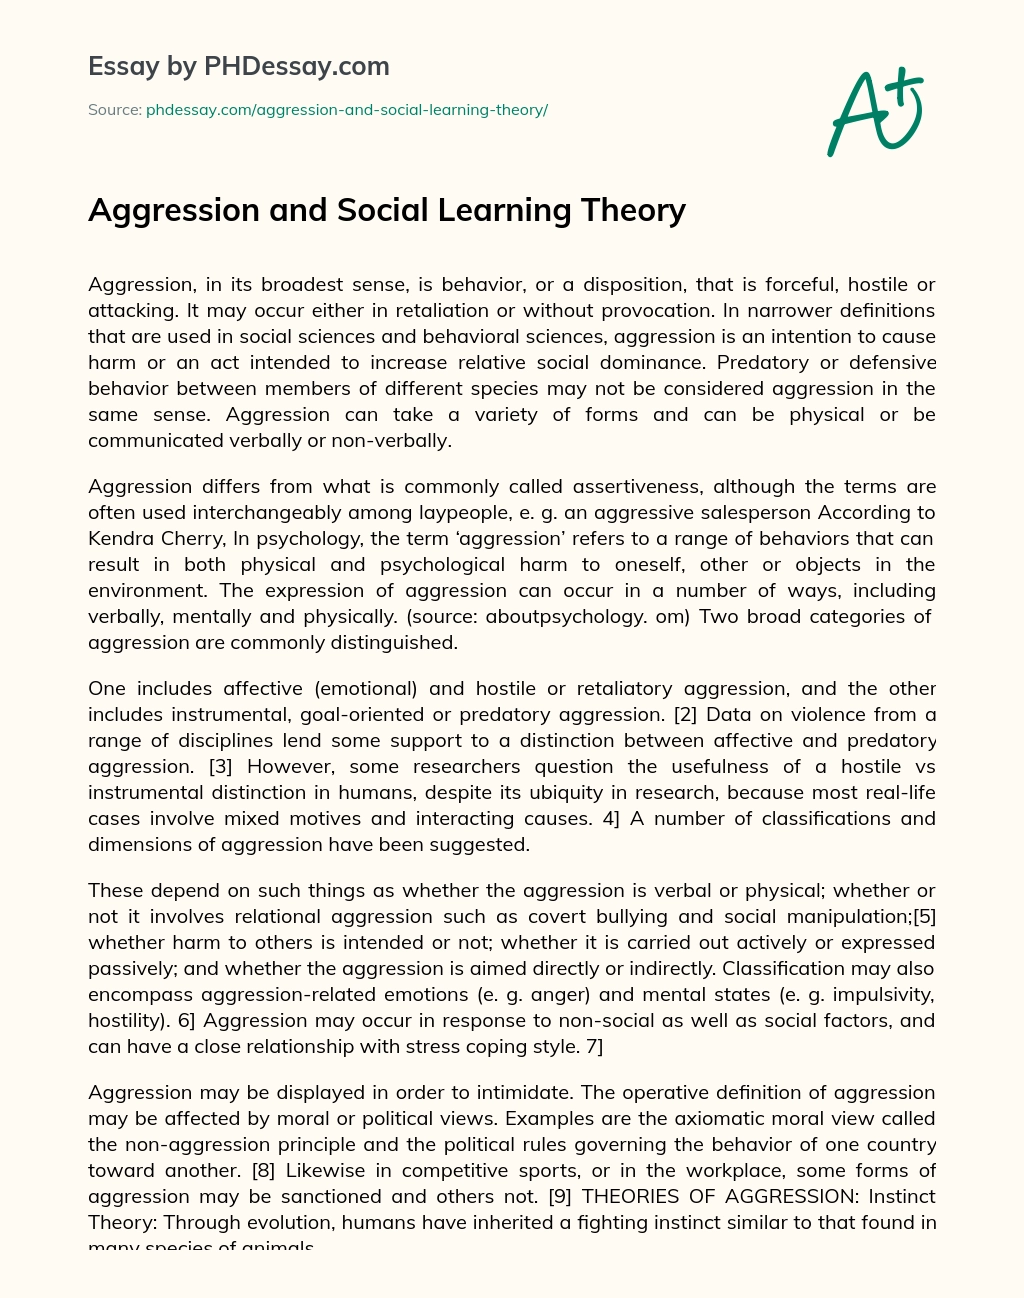 Aggression and Social Learning Theory essay